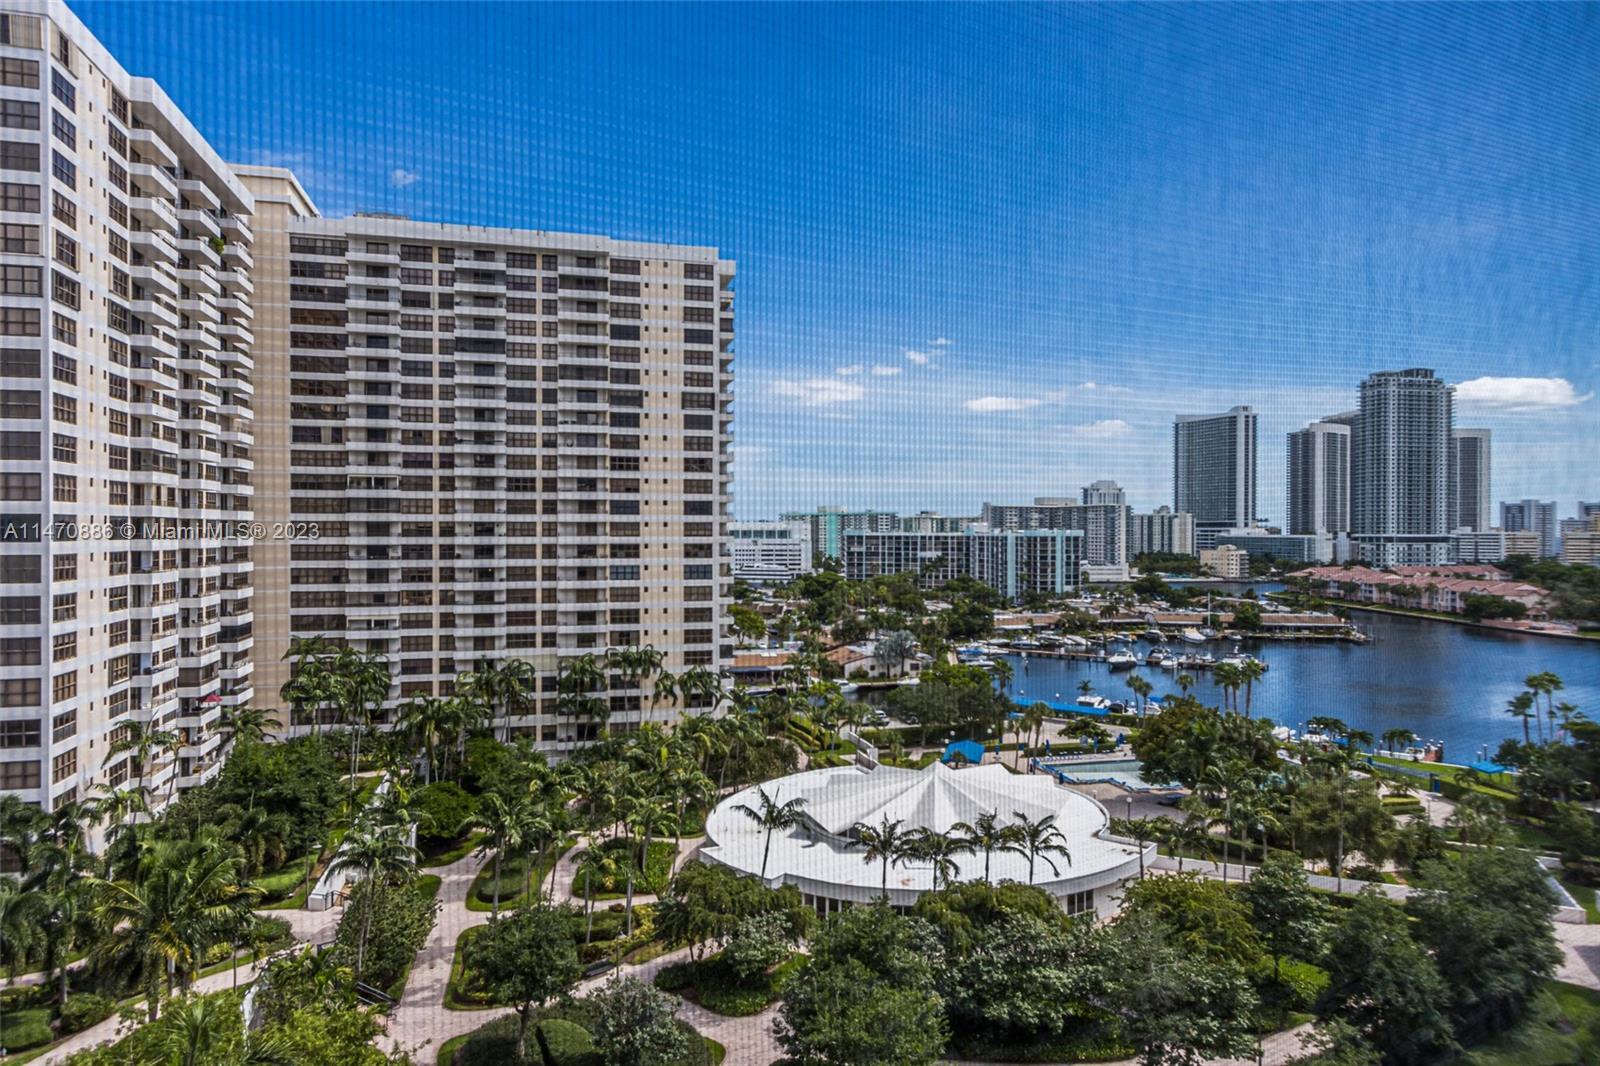 WATERFRONT CONDO OVERLOOKING THE INTRACOASTAL AND MARINA. DESIRABLE SPLIT BEDROOM FLOOR PLAN EACH WI